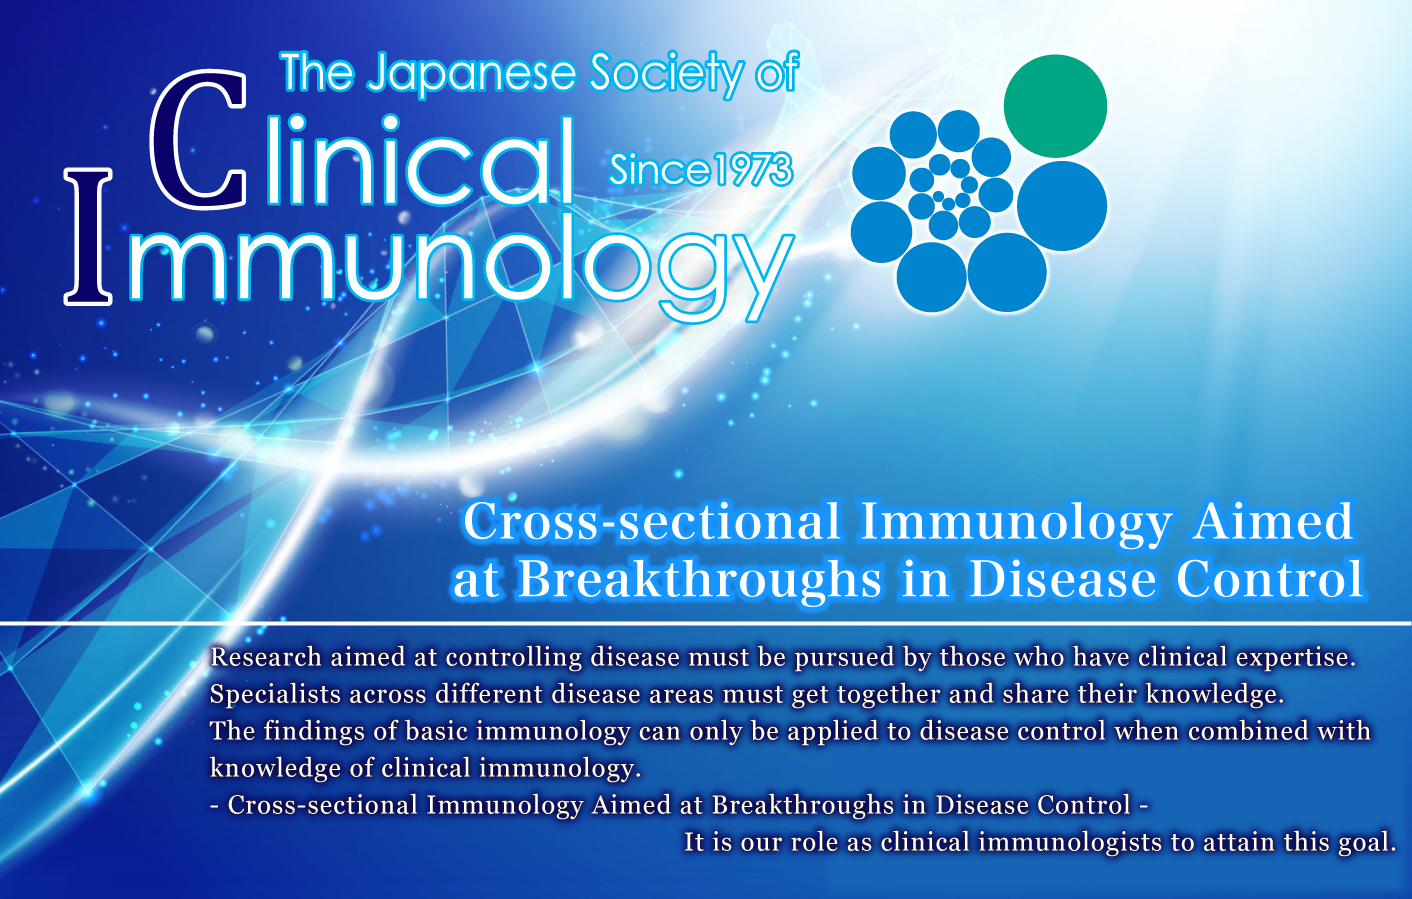 The Japanese Society of Clinical Immunology